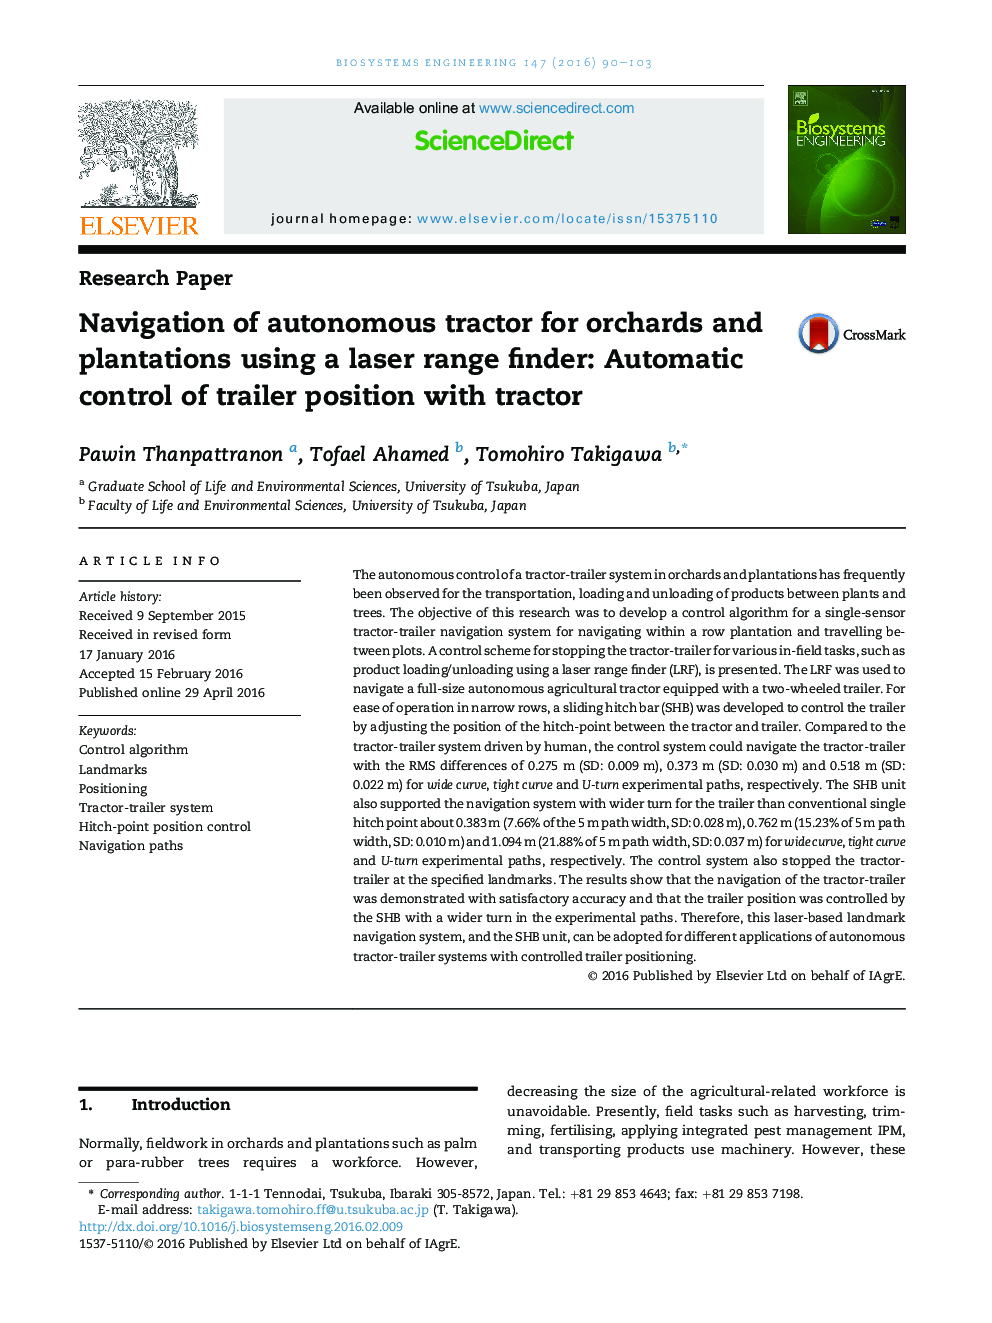 Navigation of autonomous tractor for orchards and plantations using a laser range finder: Automatic control of trailer position with tractor